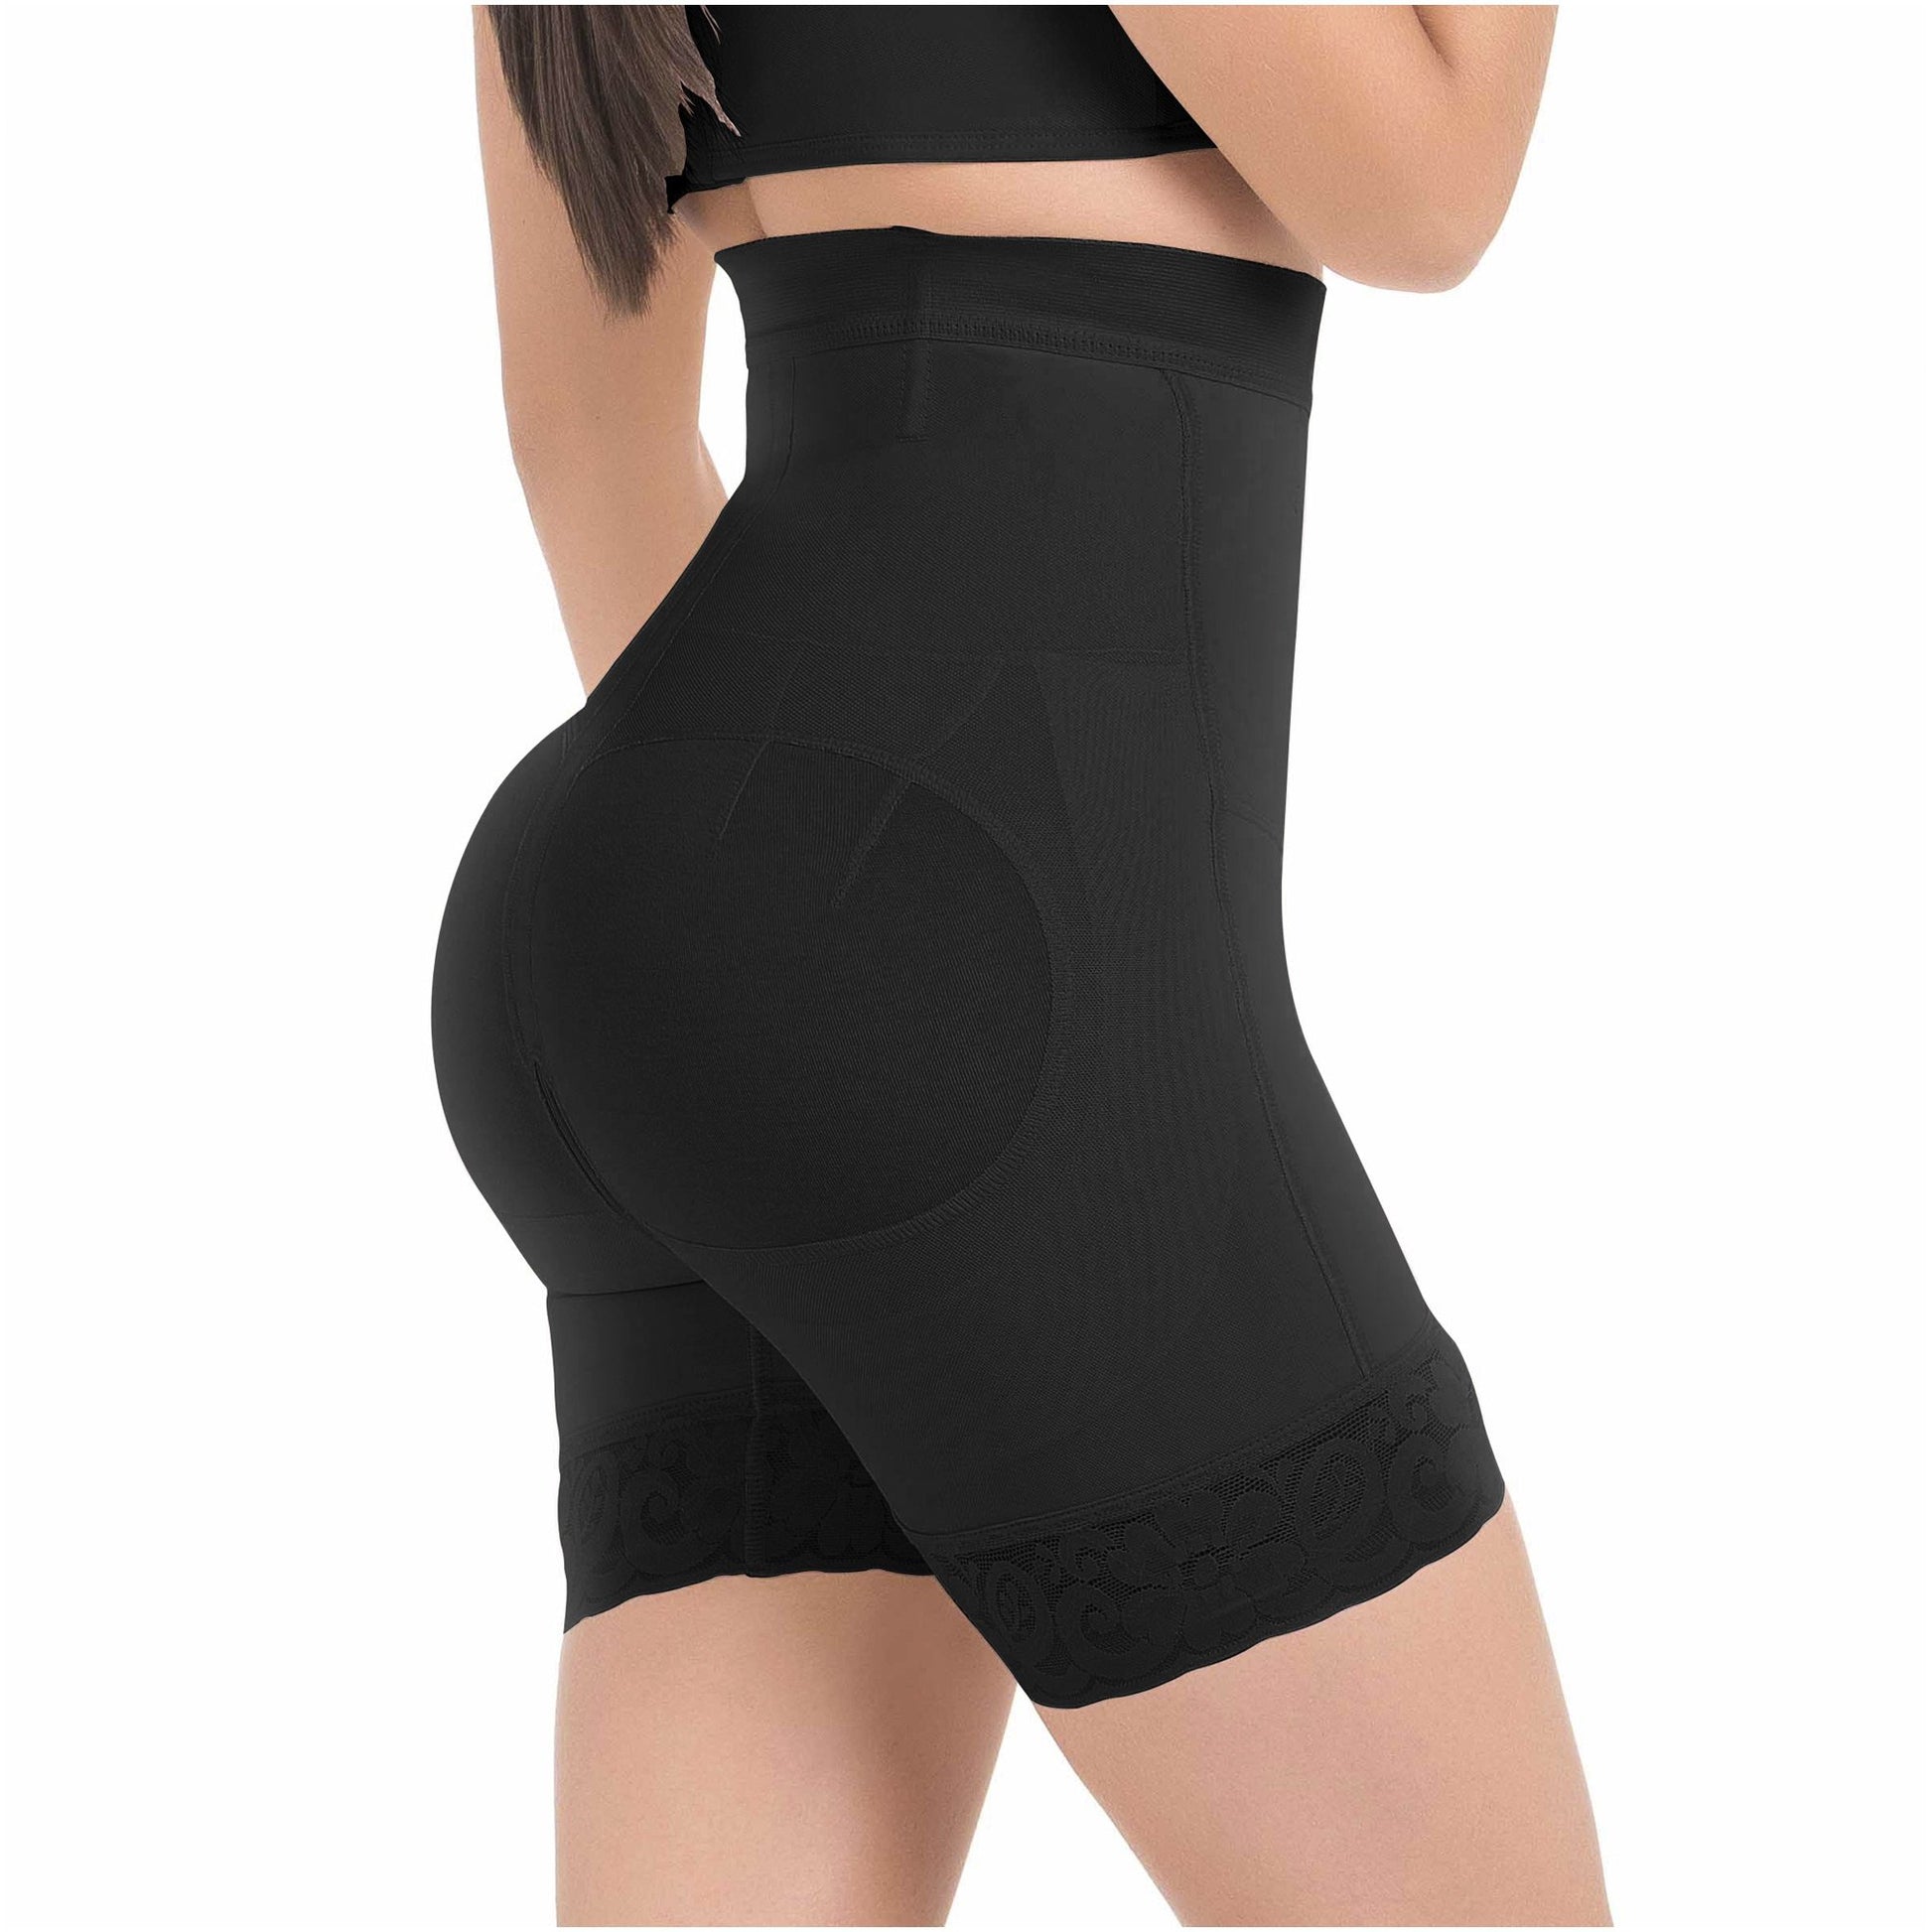 MariaE Fajas 9549 | Ideal Girdle High-Waist Shorts for Women | Daily Use Body Shaper with Butt Lift & Tummy-Control | Powernet - fajacolombian